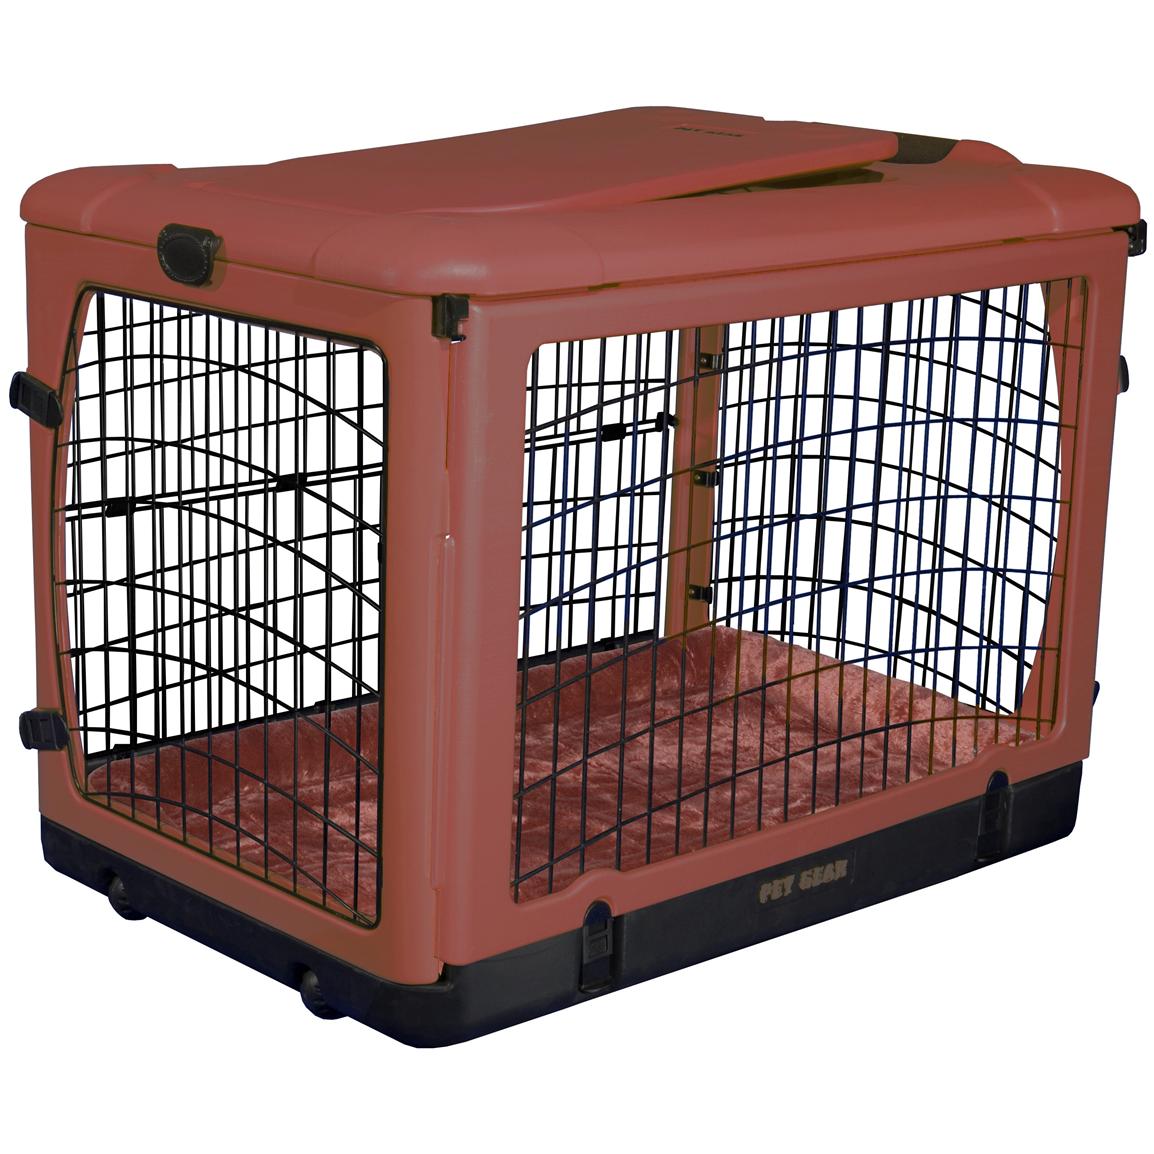 Pet Gear® The Other Door Steel Crate with Plush Pad 176274, Kennels & Beds at Sportsman's Guide